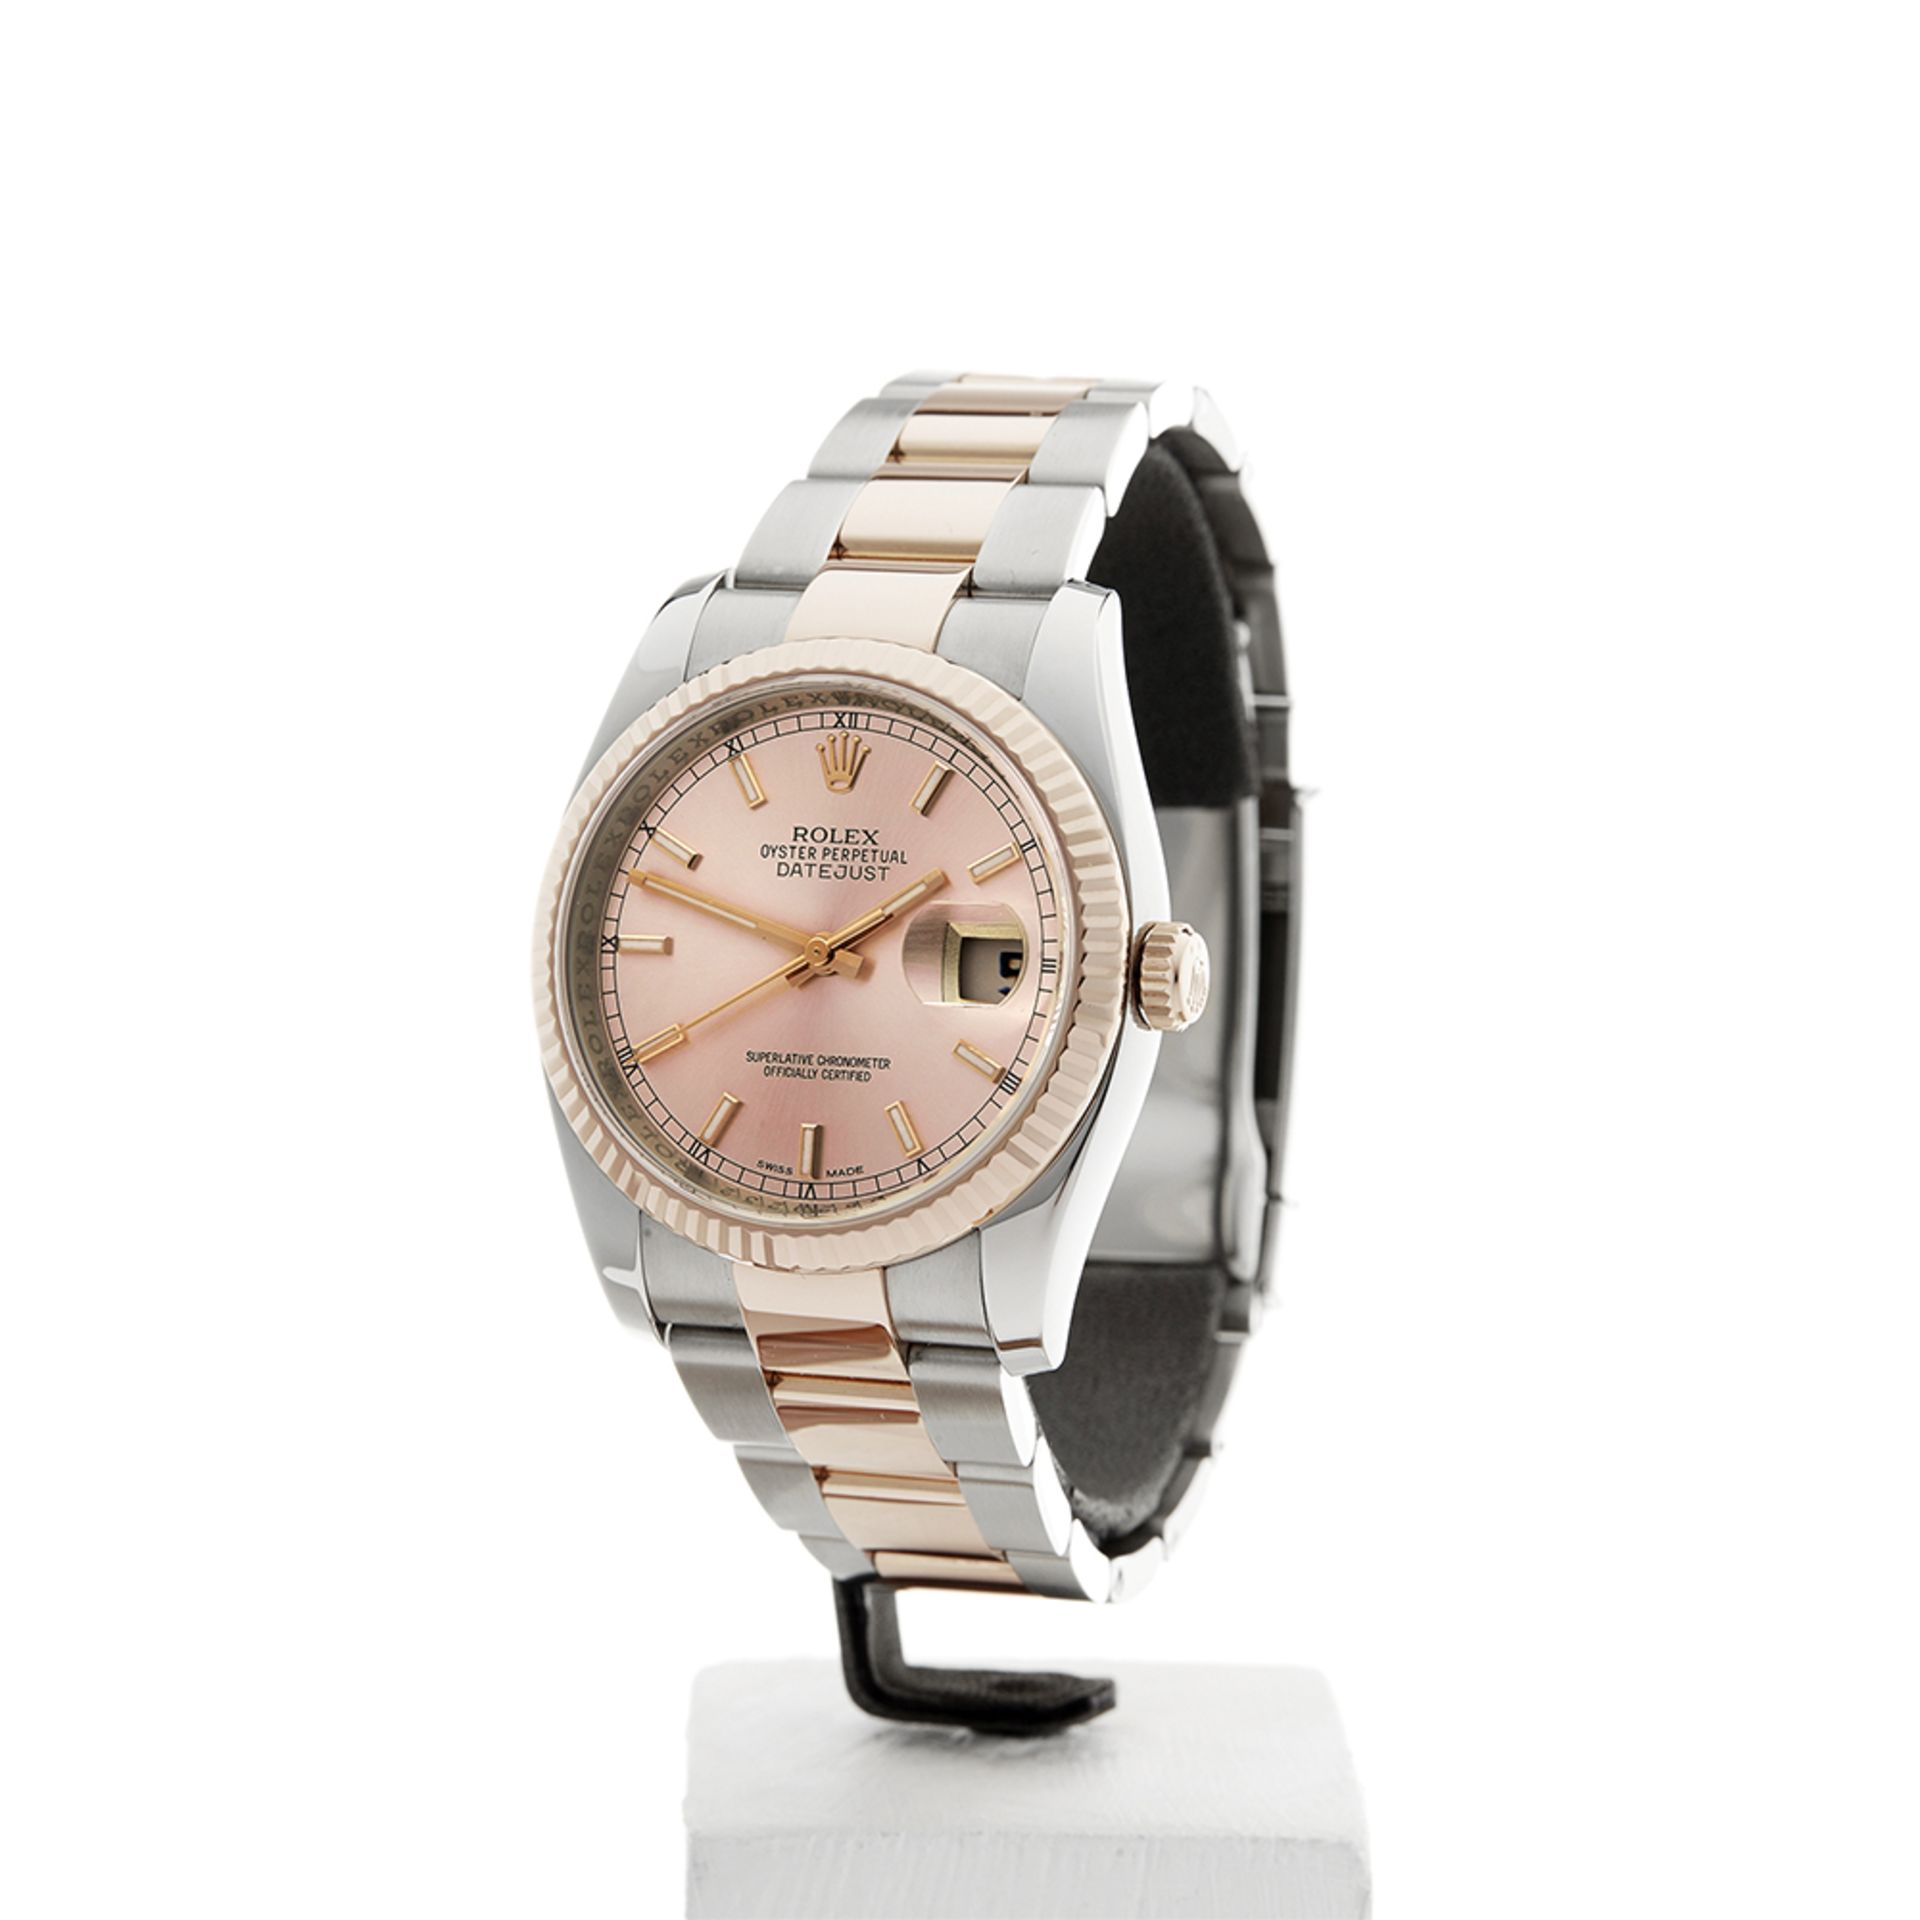 Datejust 36mm Stainless Steel & 18k Rose Gold - 116231